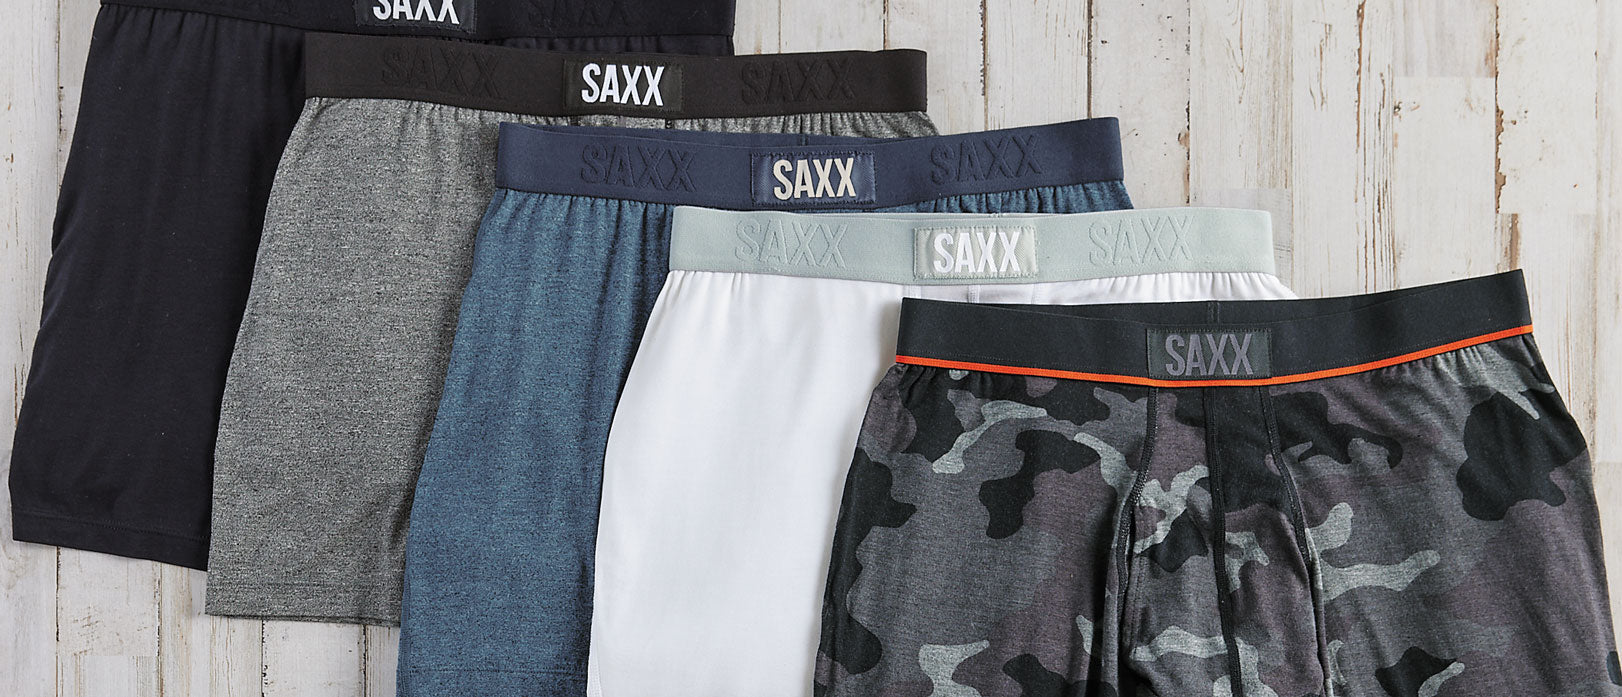 SAXX Fired Up Vibe Boxer Briefs